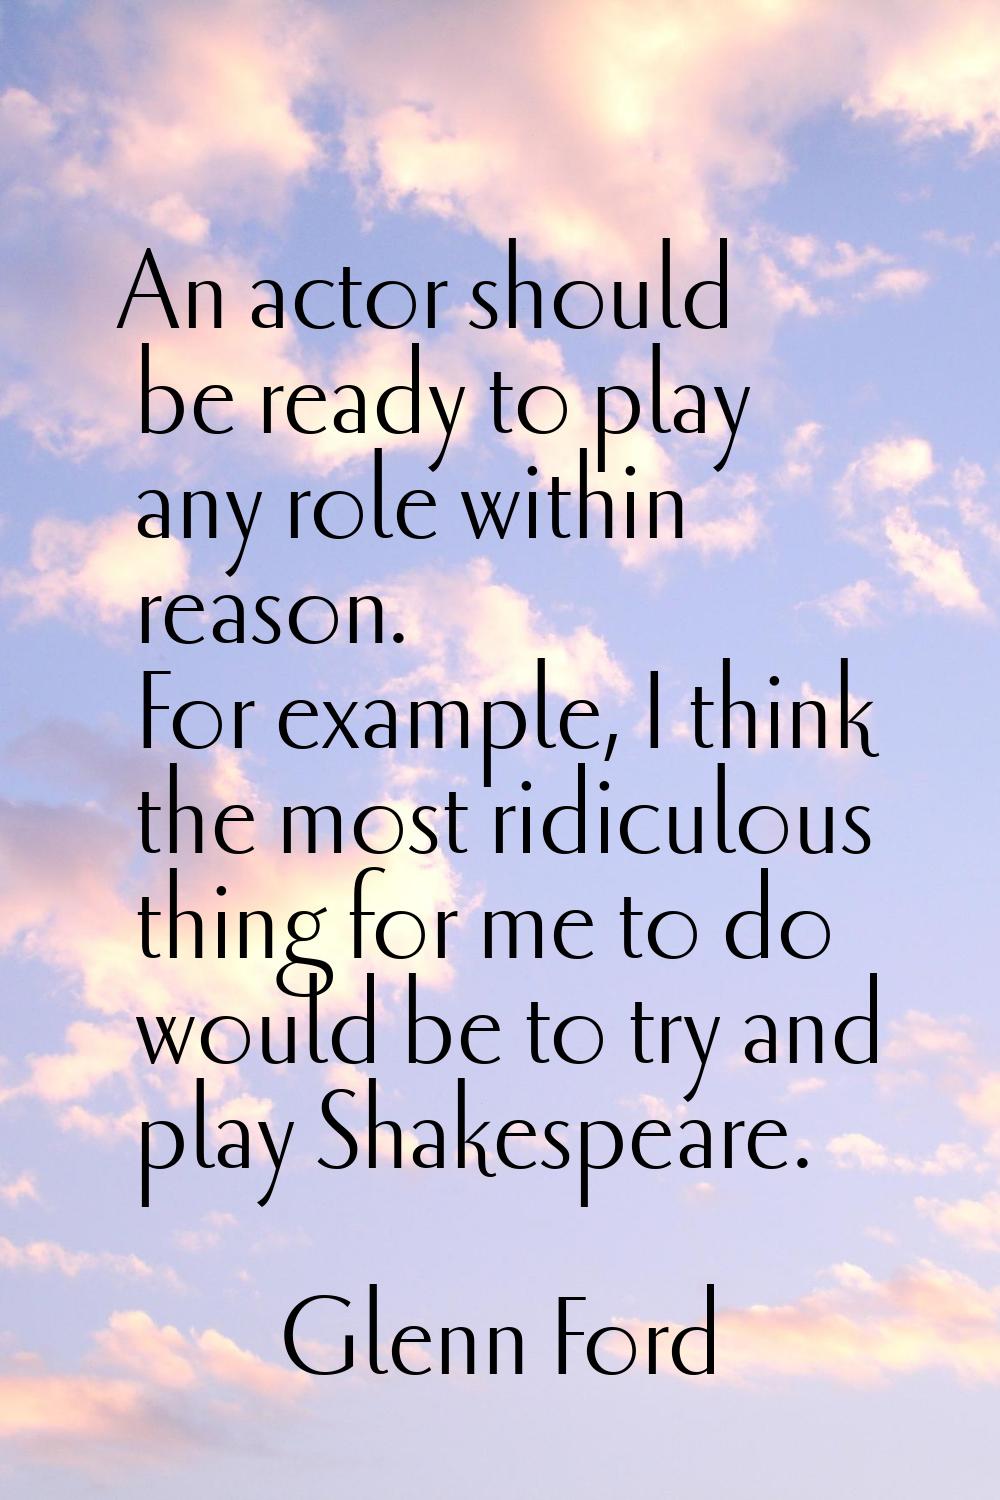 An actor should be ready to play any role within reason. For example, I think the most ridiculous t